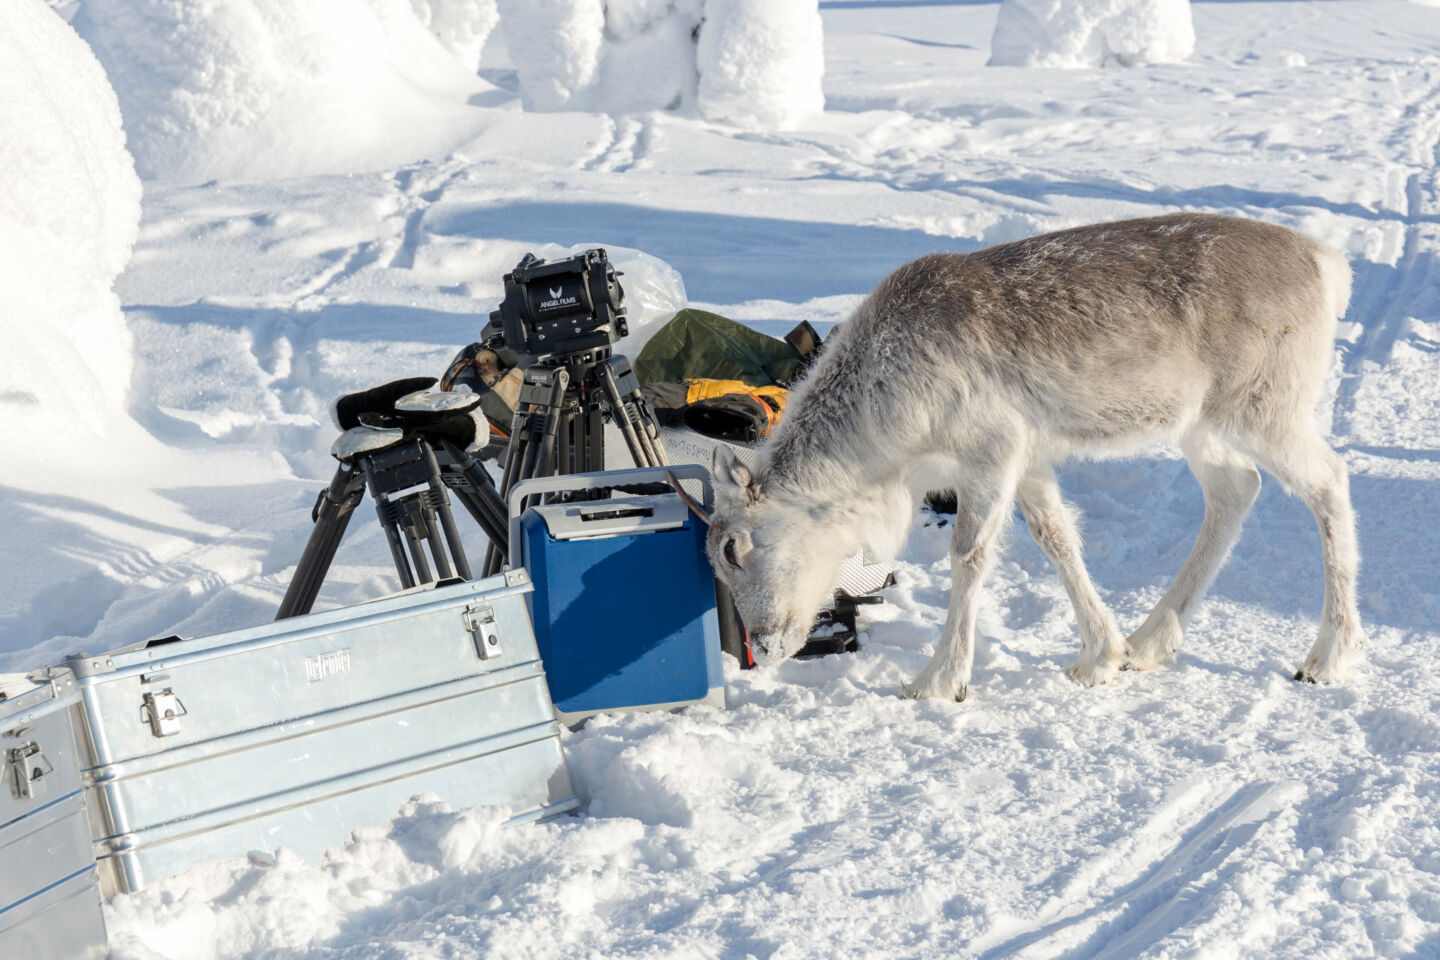 A curious reindeer on set of A Reindeer's Journey, filmed in Finnish Lapland